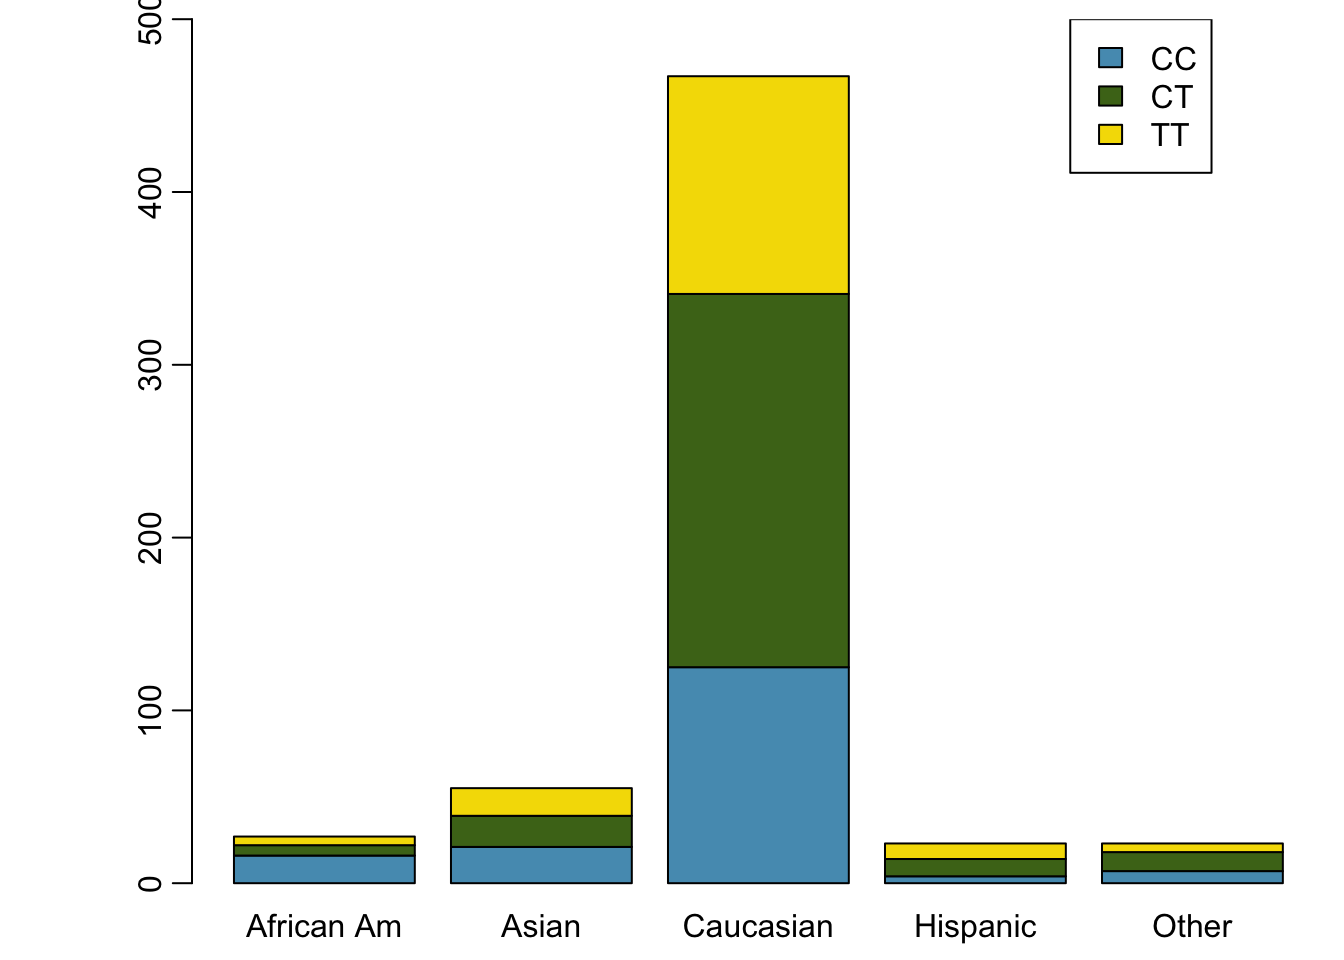 Segmented bar plot for individuals by race, with bars divided by genotype